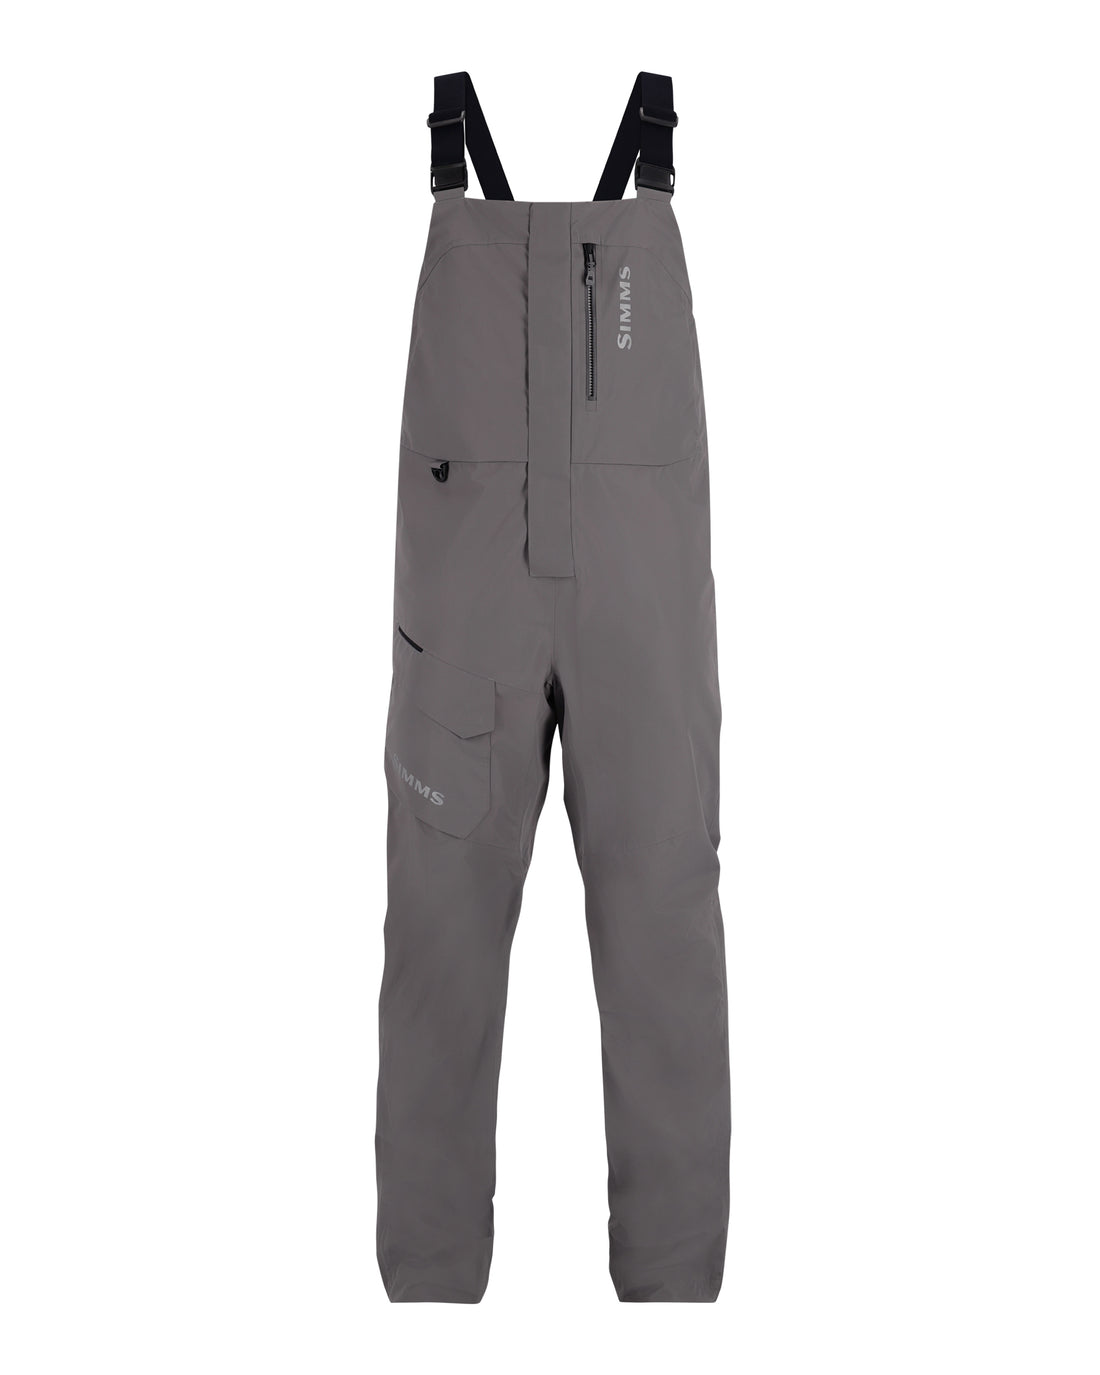 Simms Cold Weather Pant - Men's - Clothing, pants for cold weather